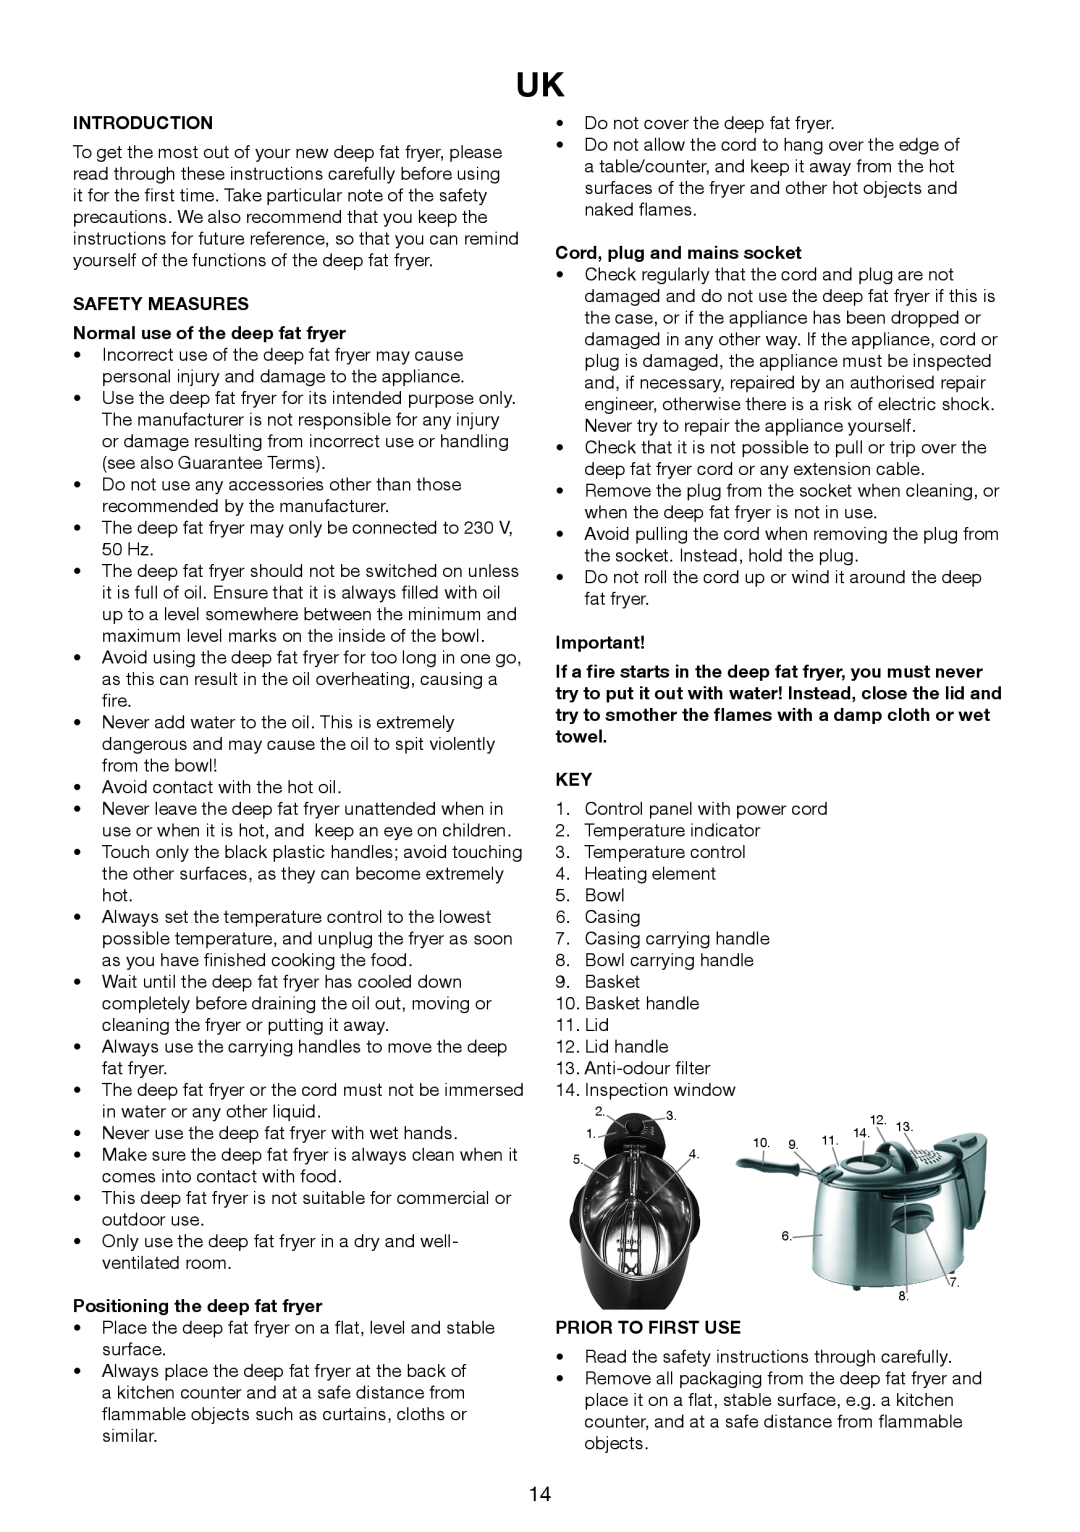 Melissa 643-198 manual Introduction, SAFETY MEASURES Normal use of the deep fat fryer, Positioning the deep fat fryer 